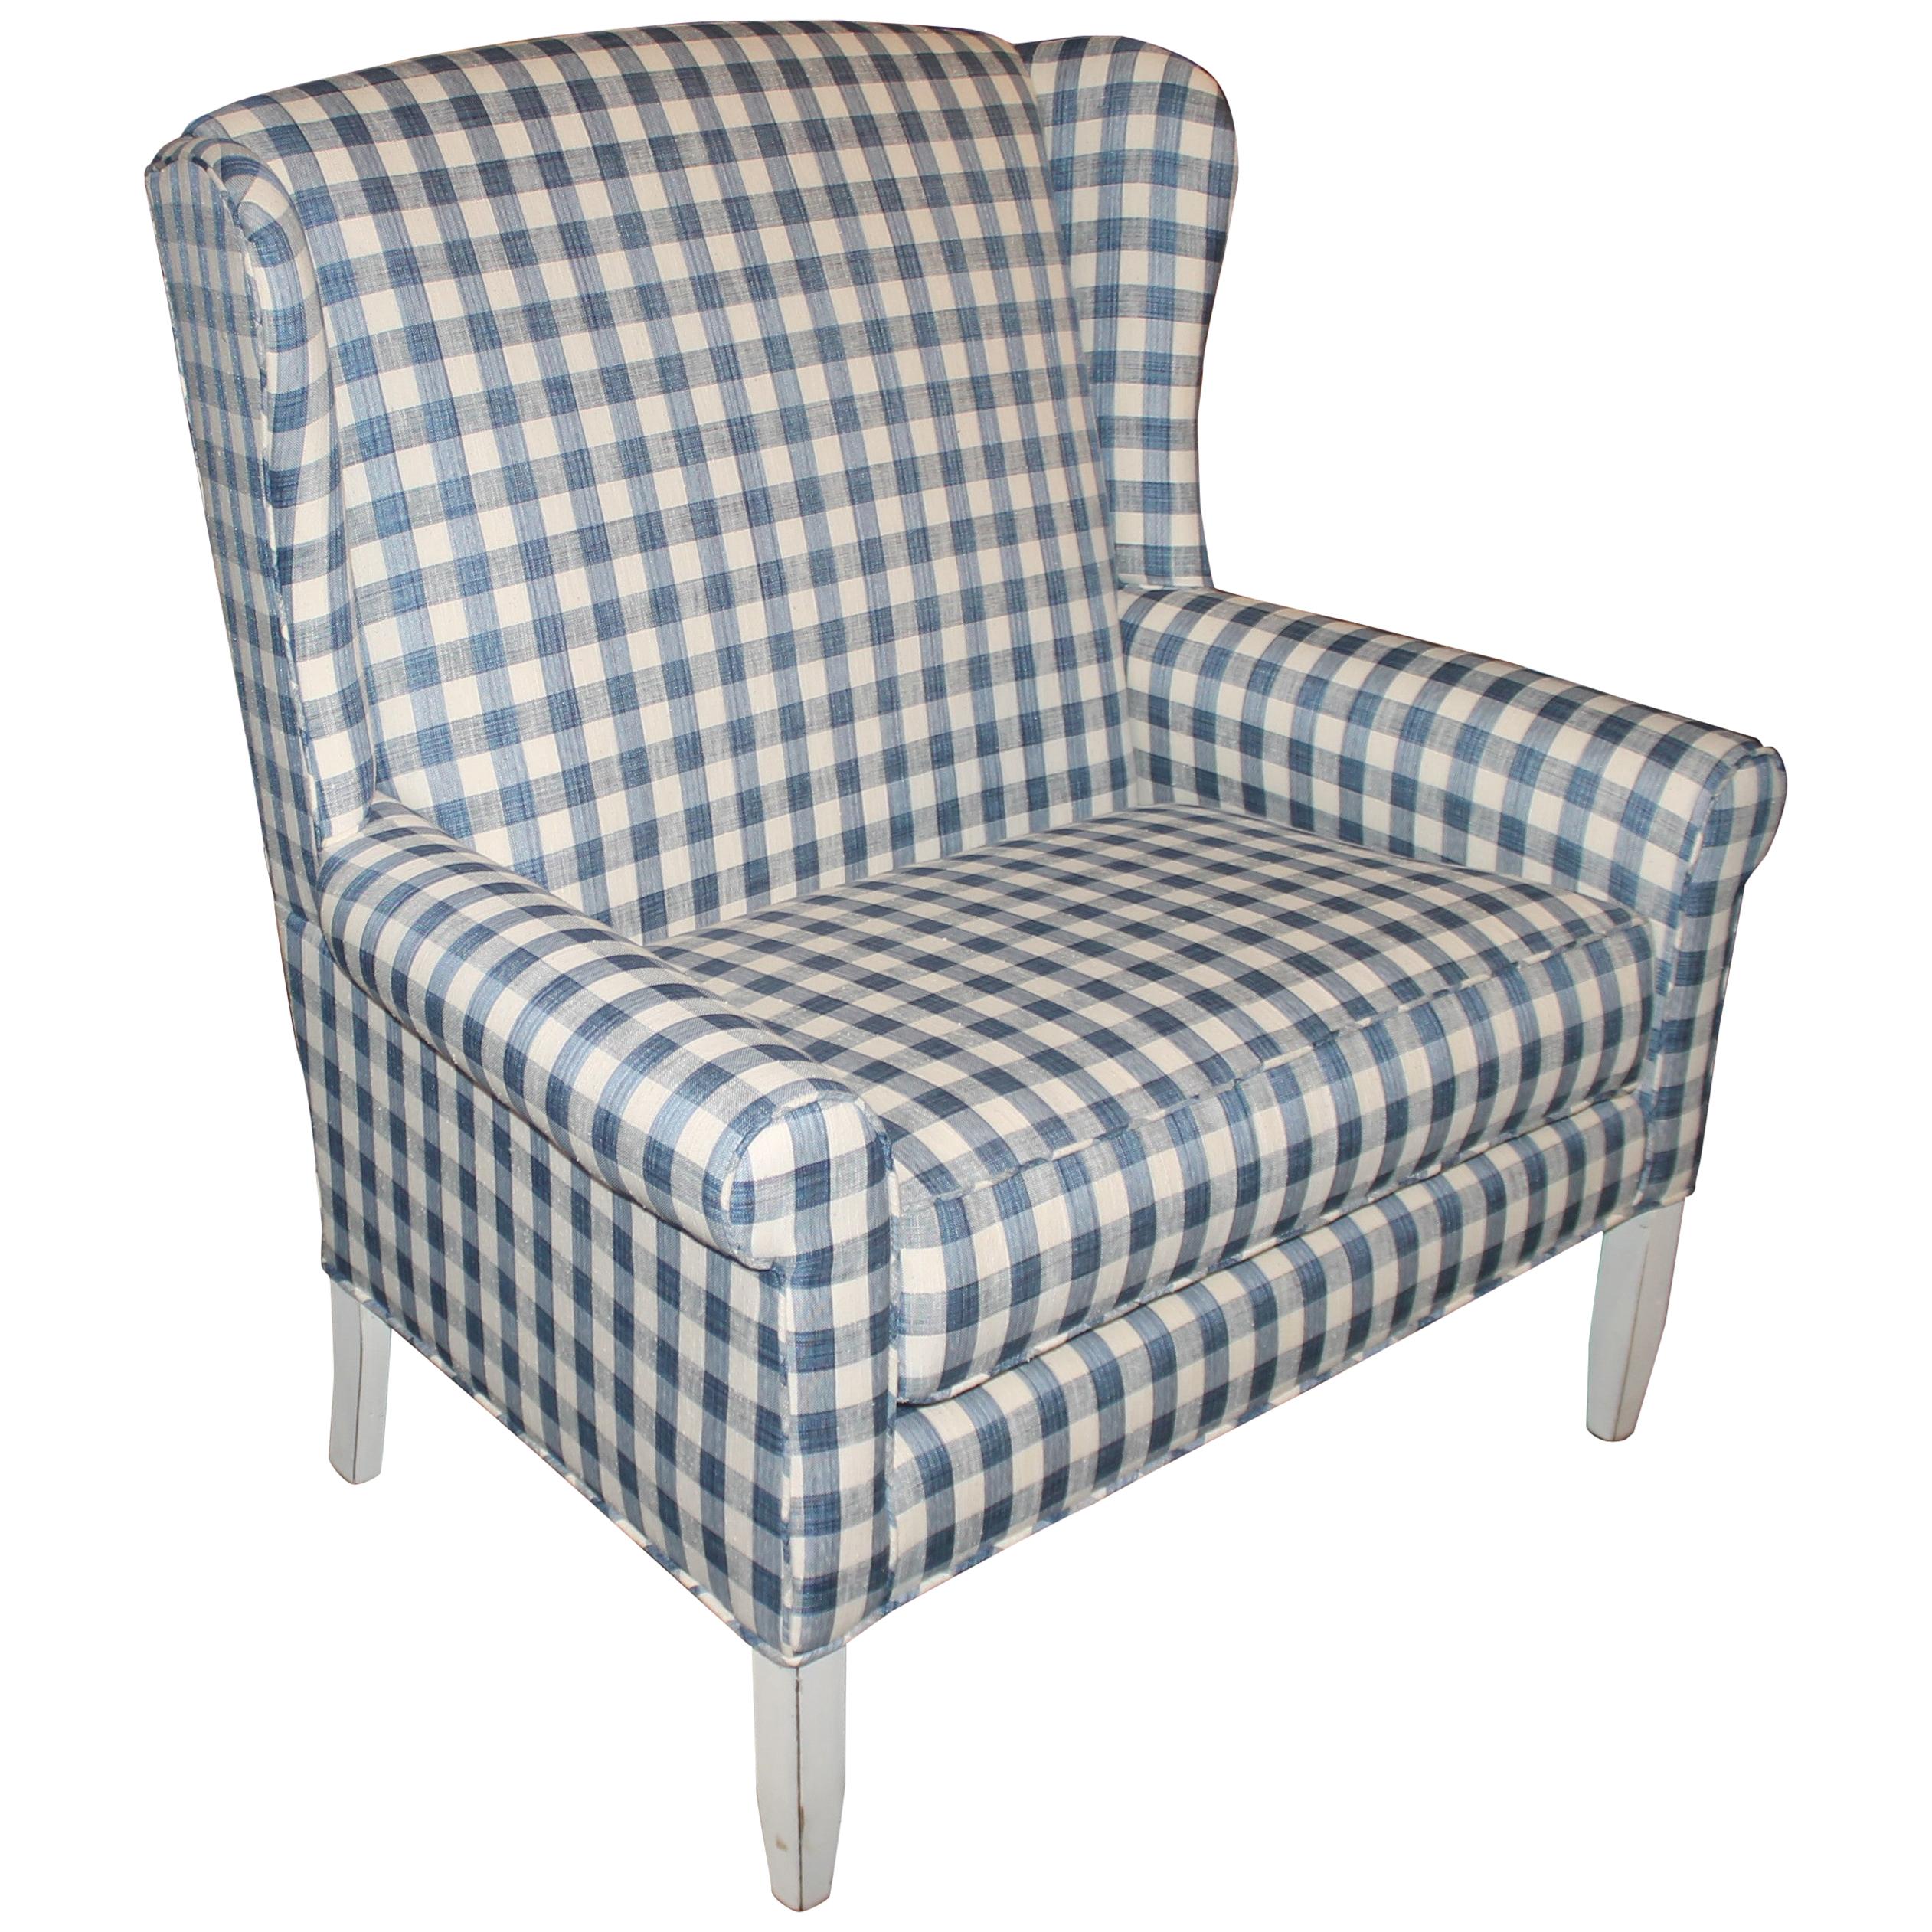 20th C Wingback Love Seat in Blue and White Check Homespun Linen